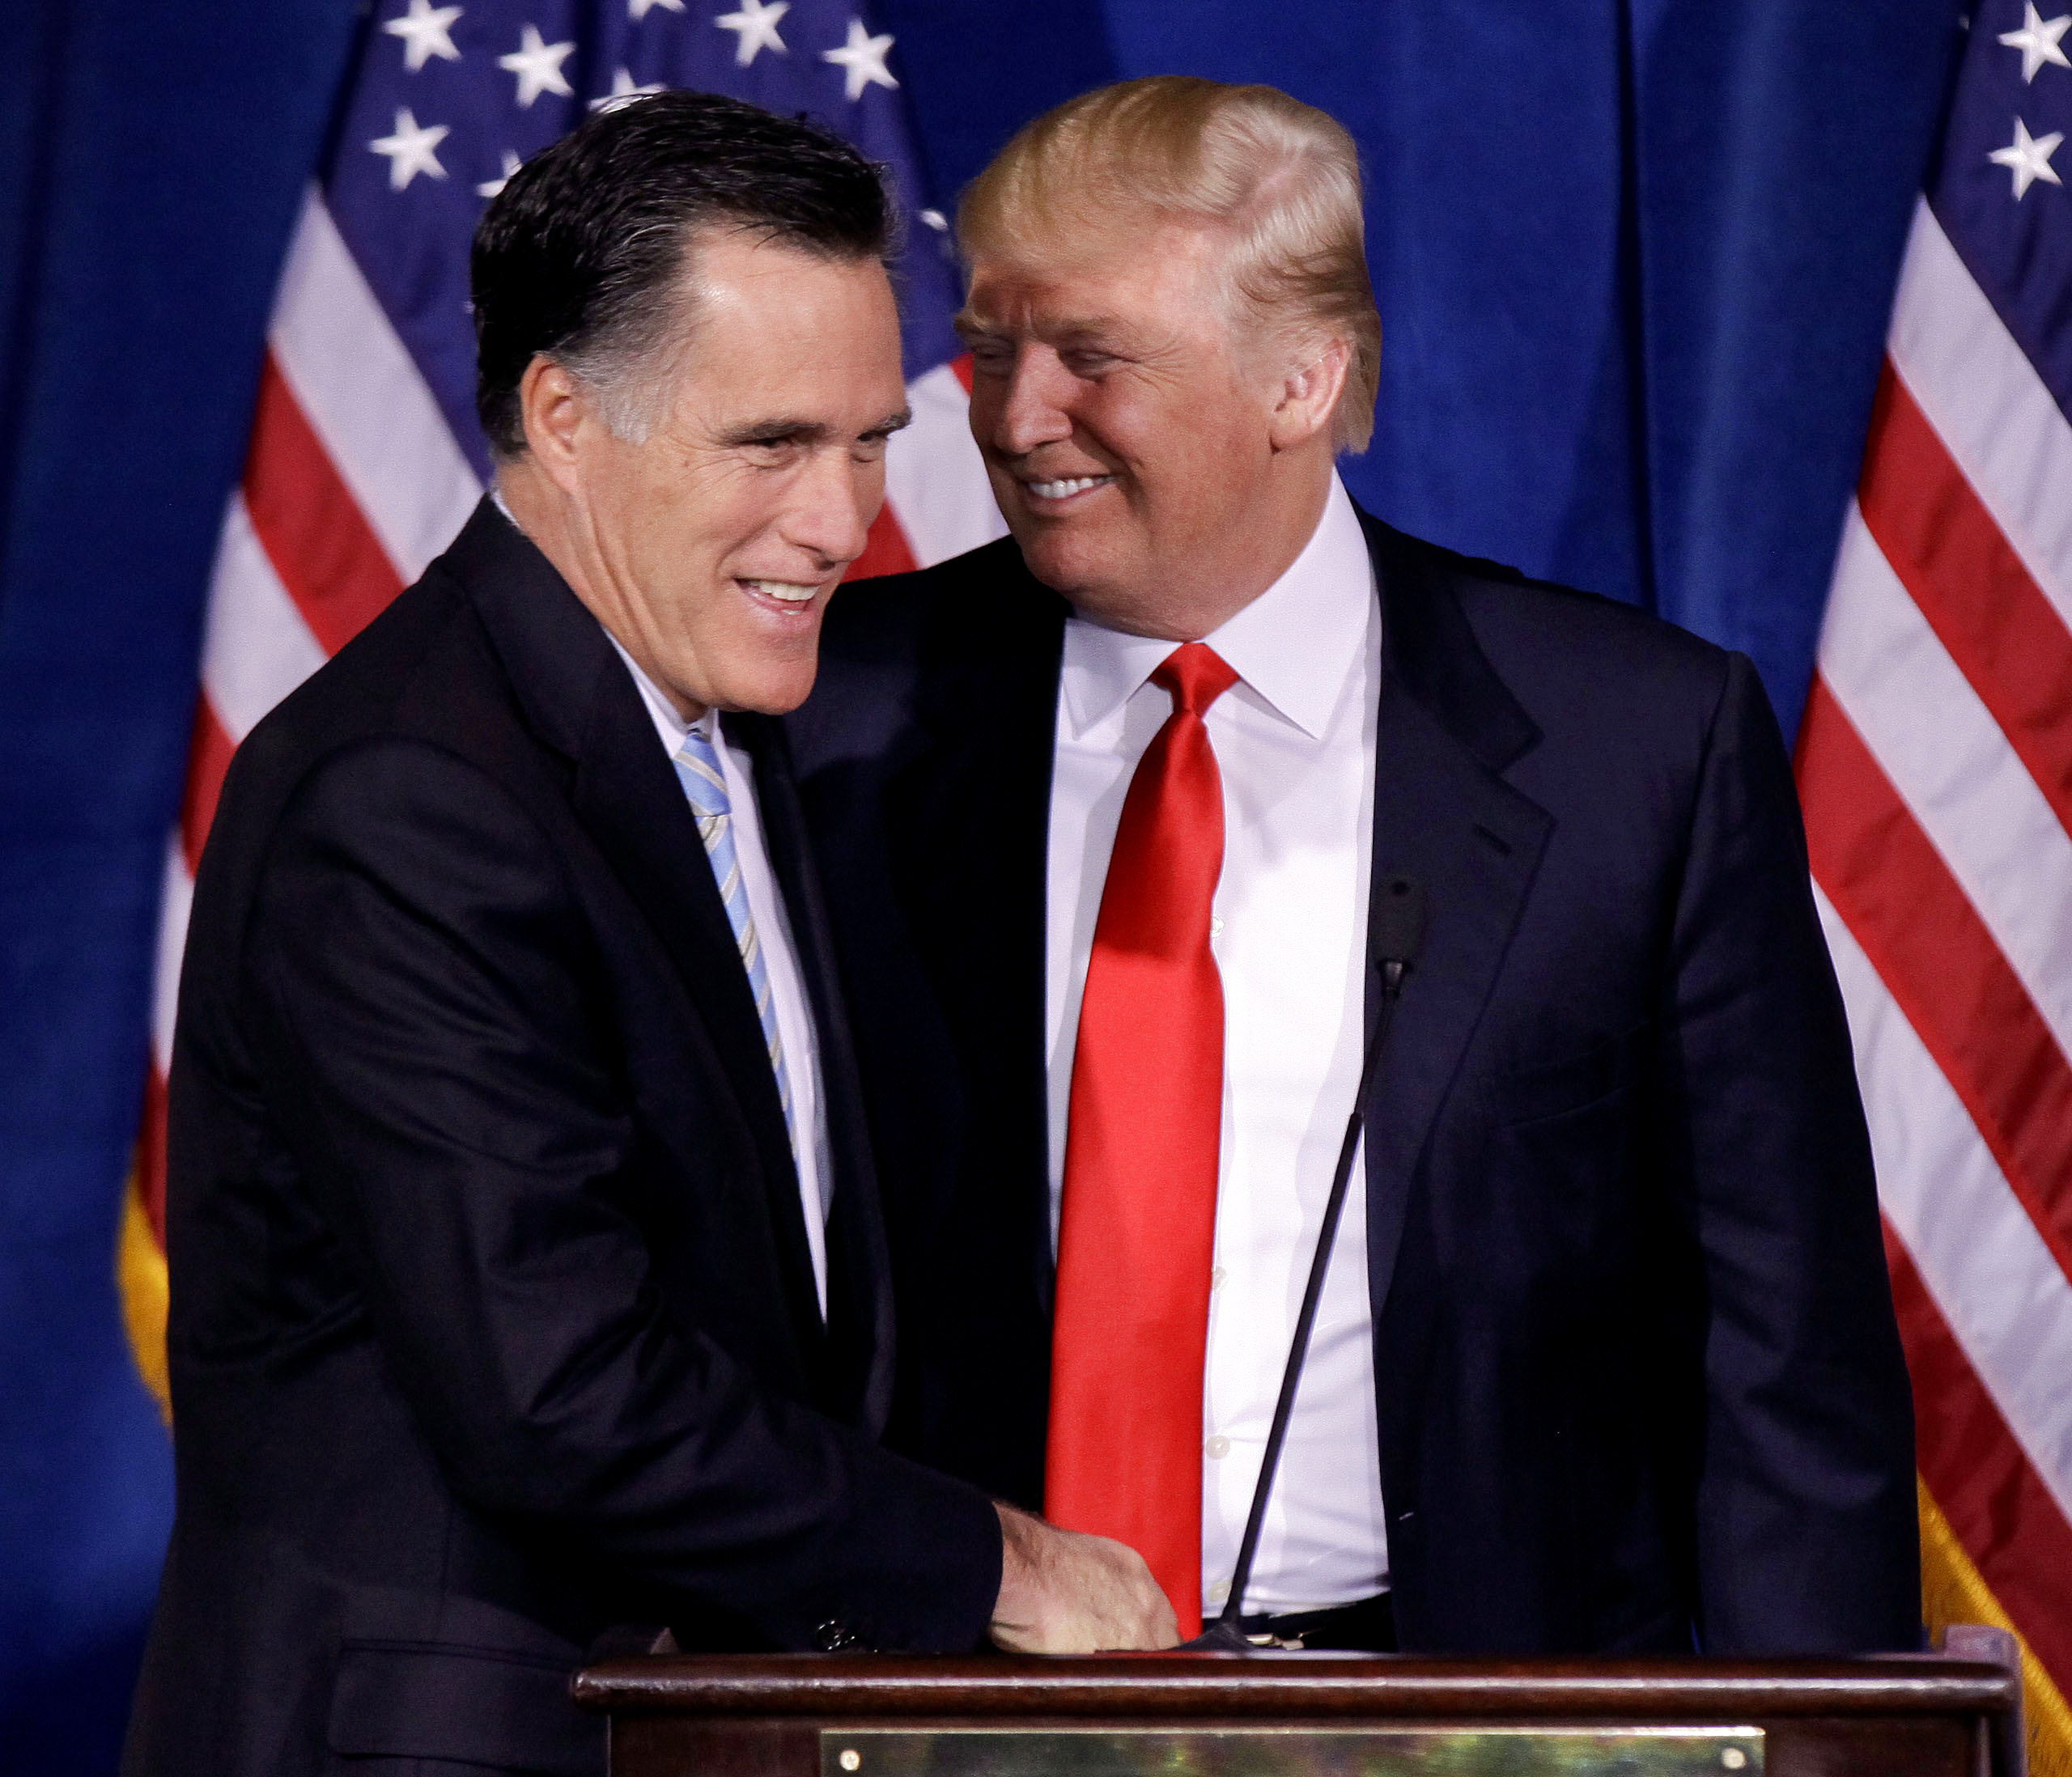 PHOTO: Donald Trump greets Republican presidential candidate, former Massachusetts Gov. Mitt Romney, after announcing his endorsement of Romney during a news conference, Feb. 2, 2012, in Las Vegas. 